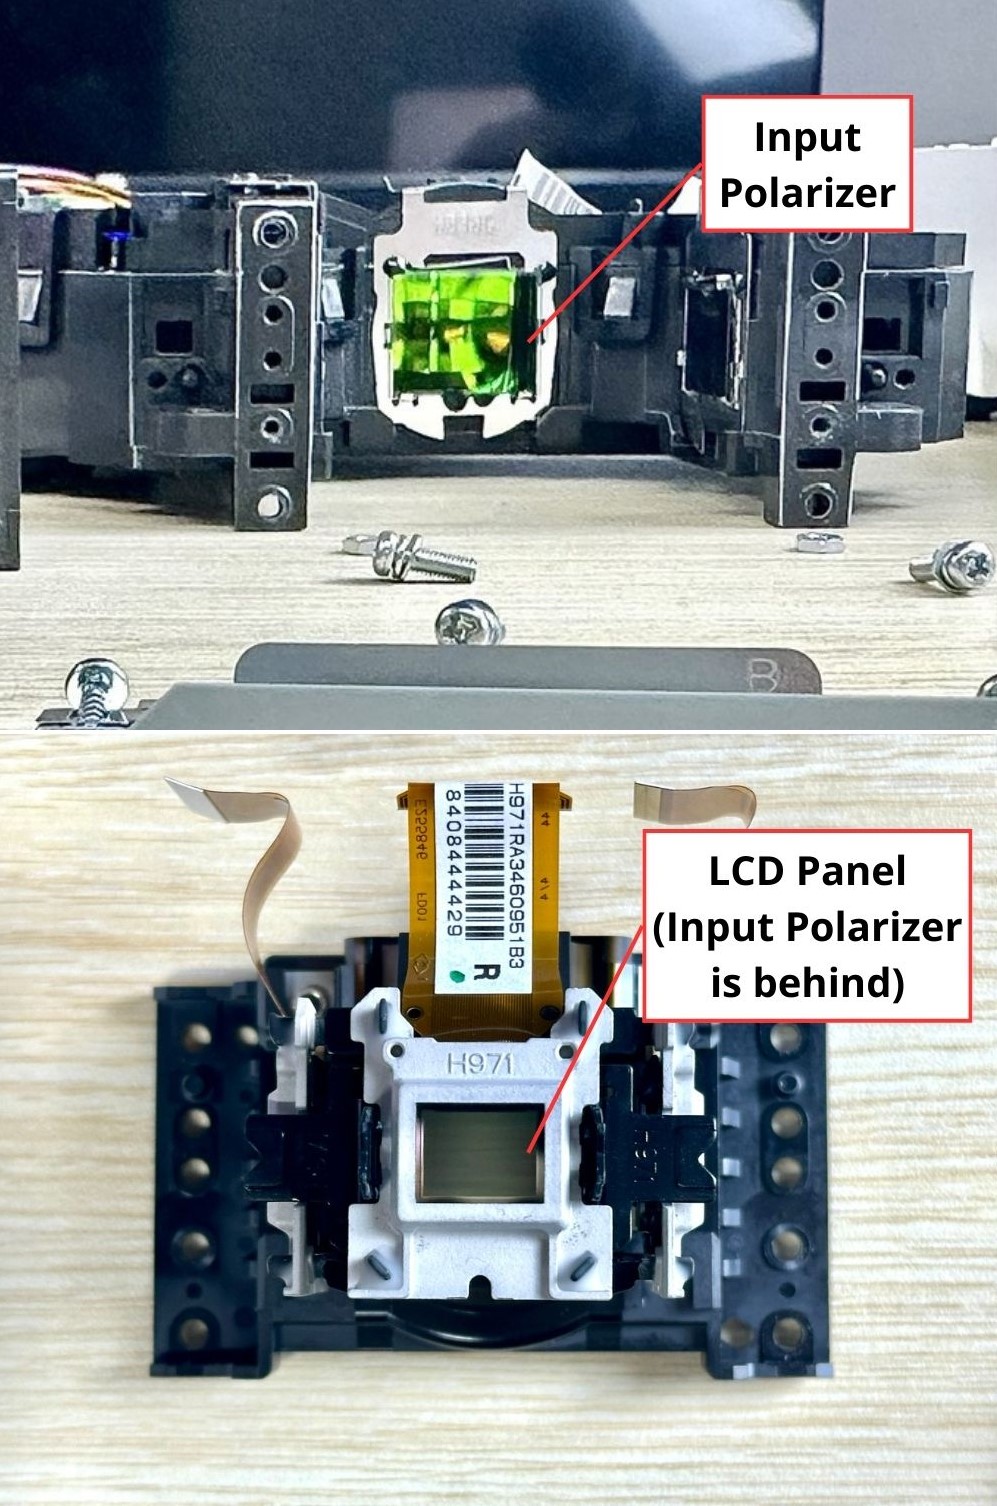 input & output polarizers of an lcd epson projector